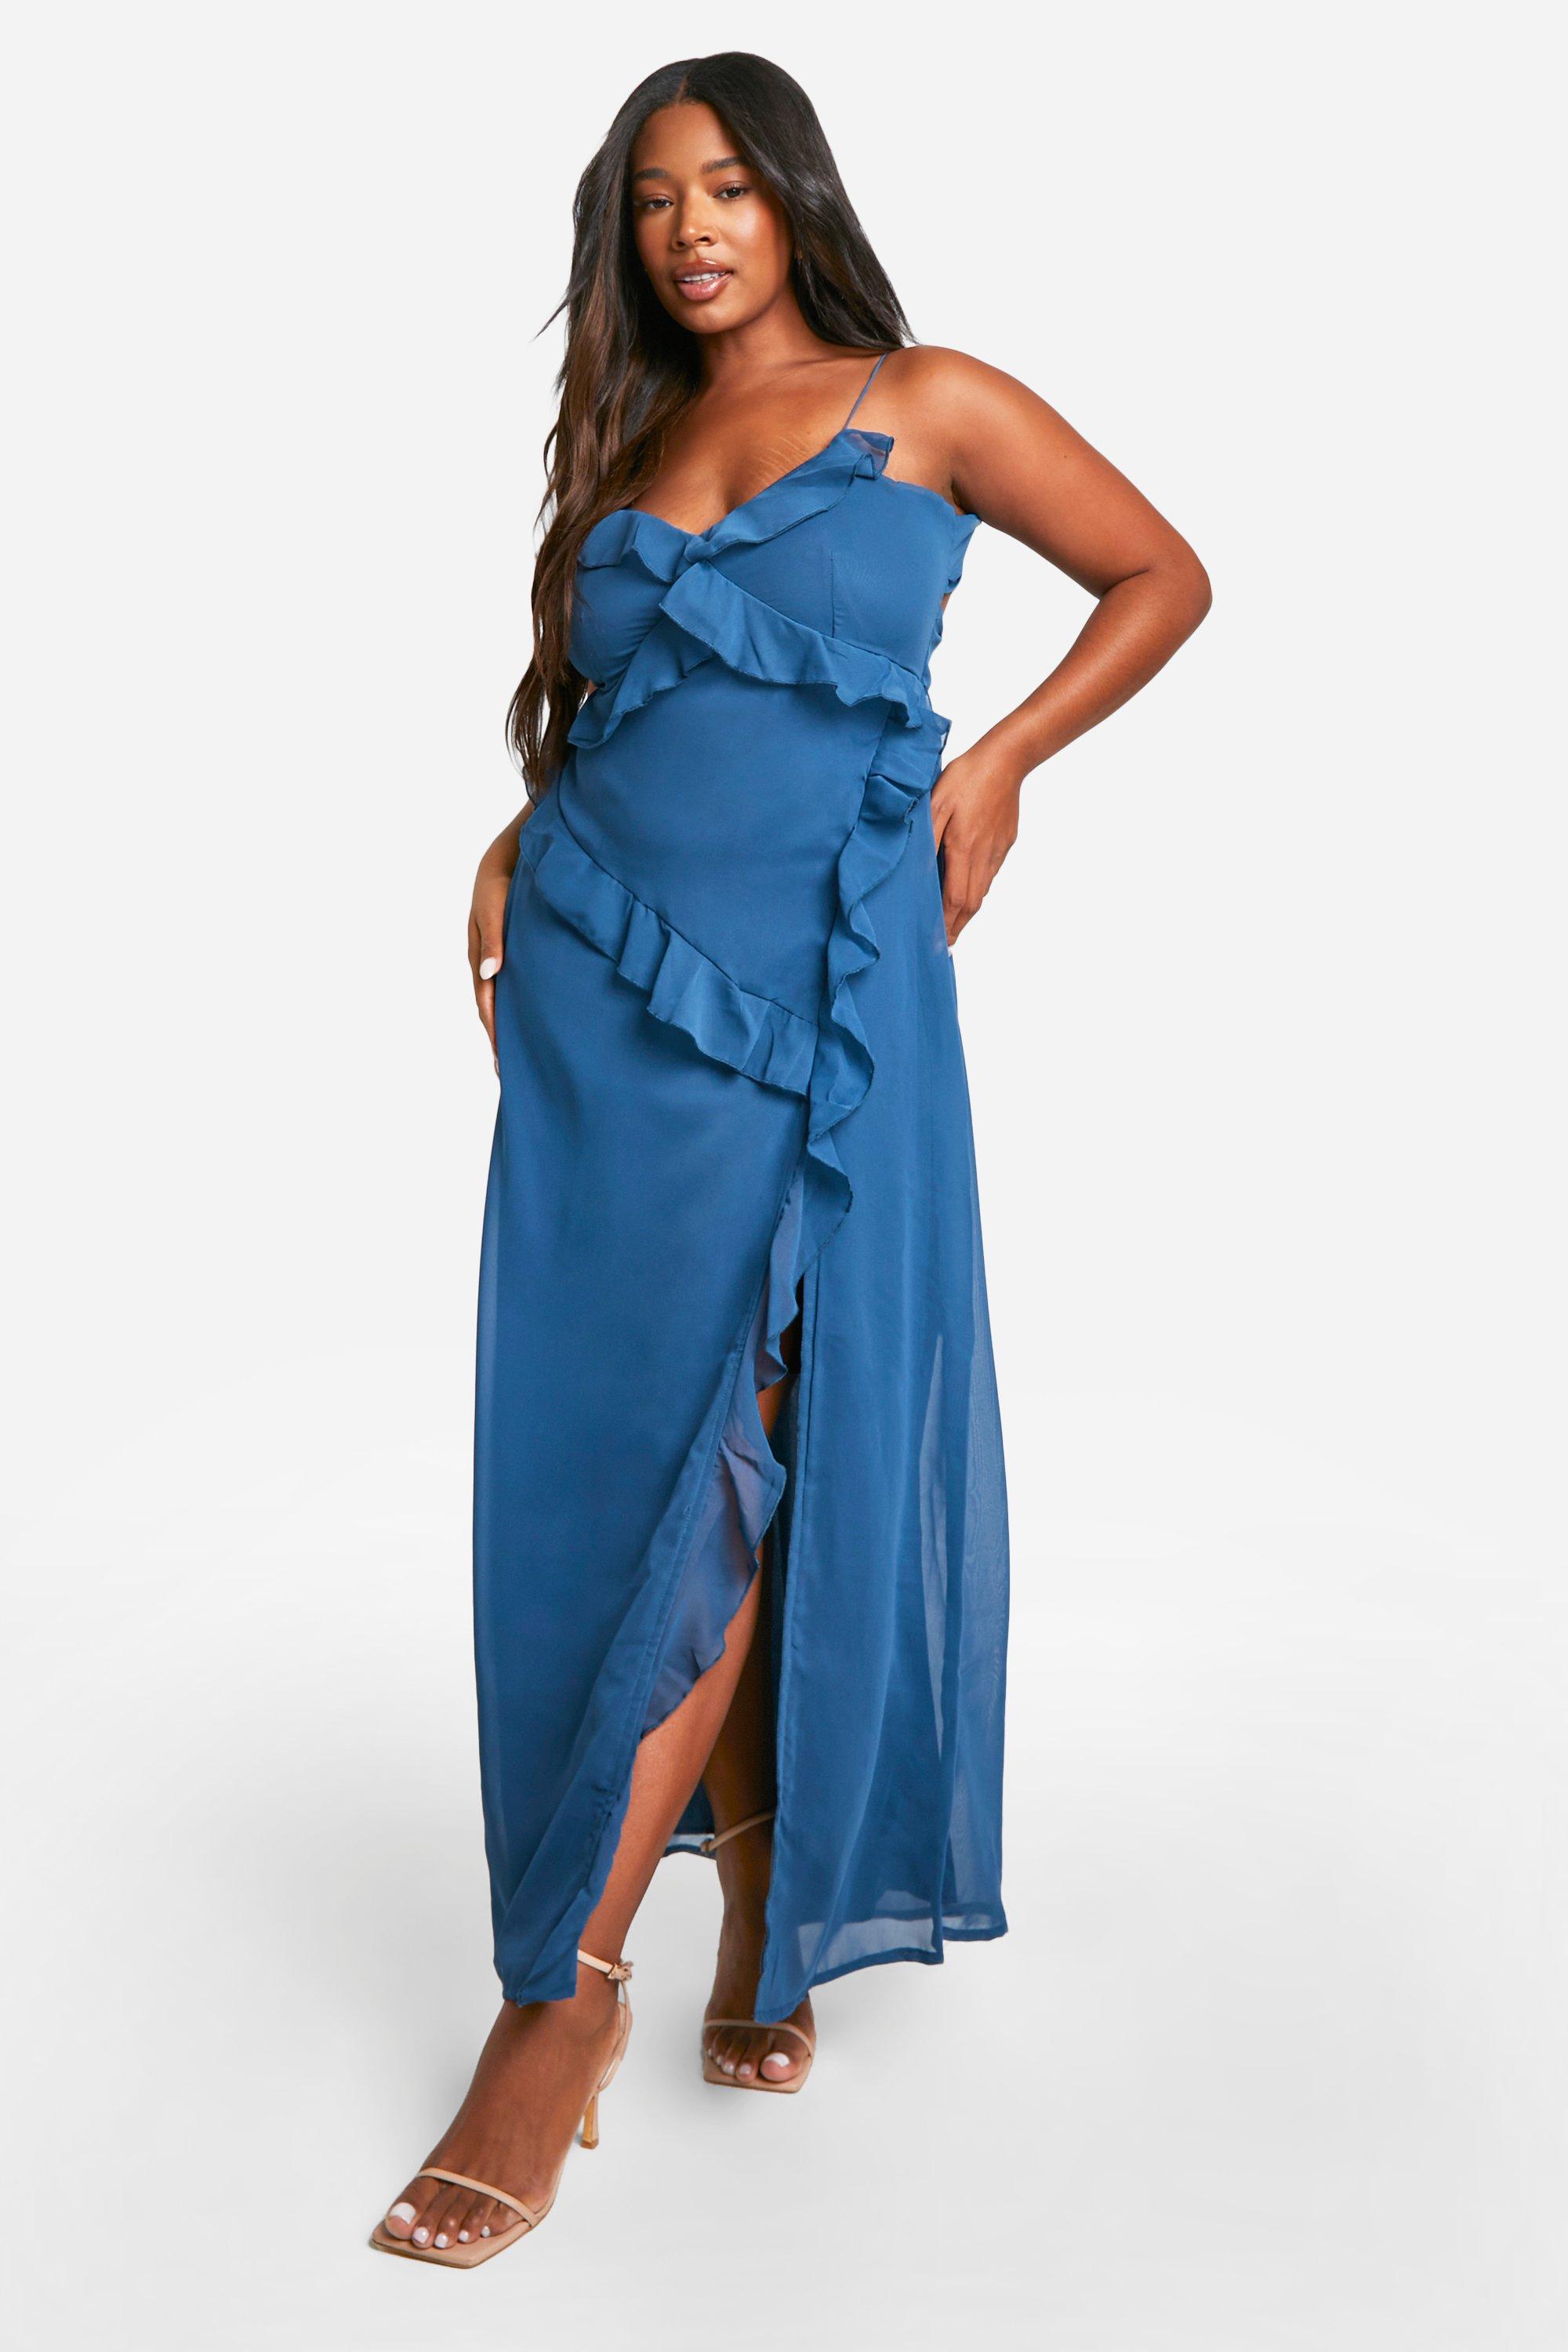 Boohoo Plus Woven Abstract Print Ruffle Detail Strappy Maxi Dress 1, Blue